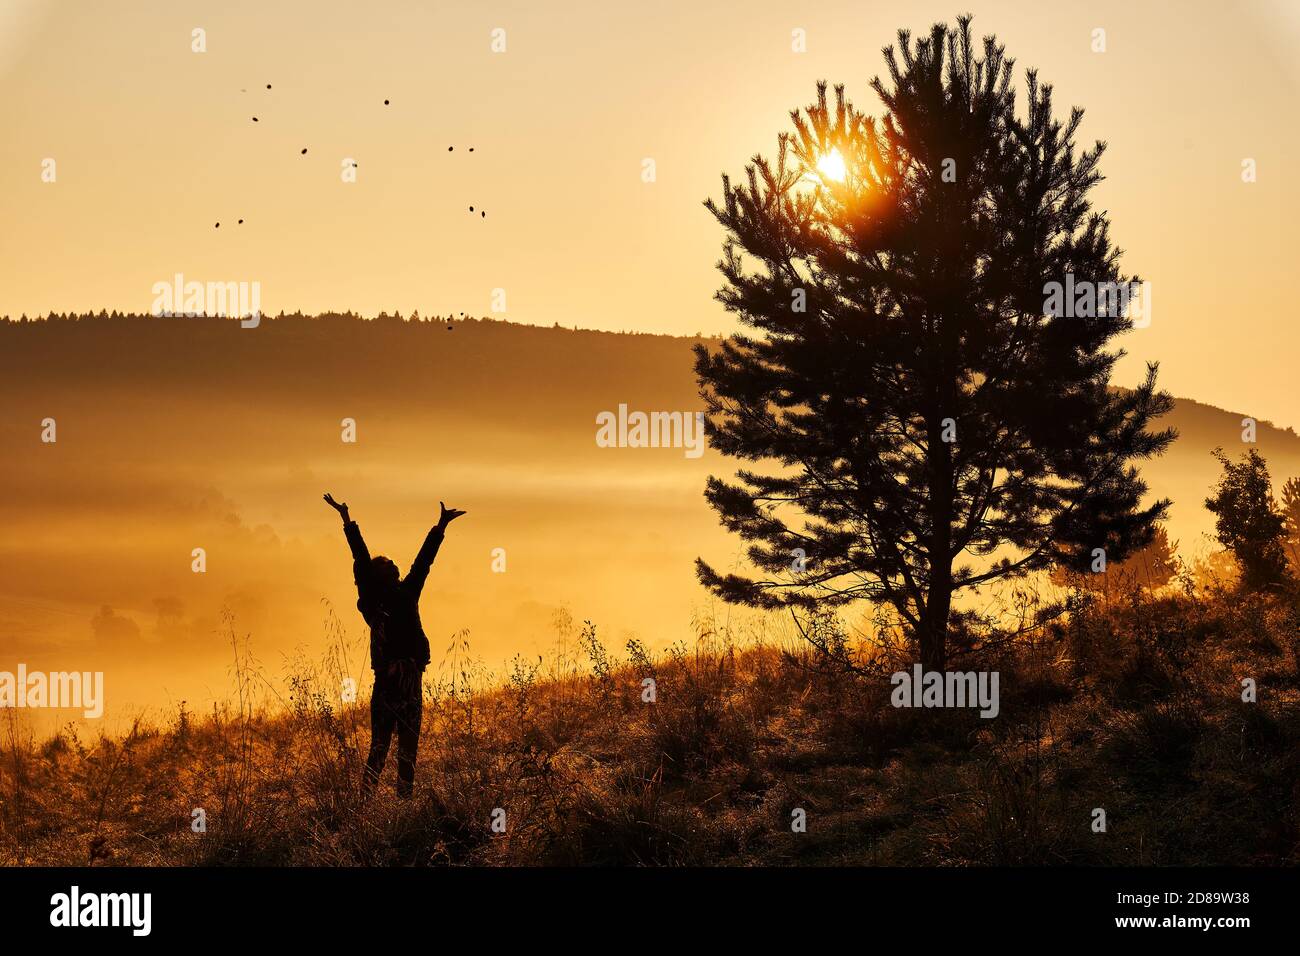 Foggy morning in the hills. The silhouette of a girl happily tossing flowers in the air. Beautiful golden sunrise. Stock Photo